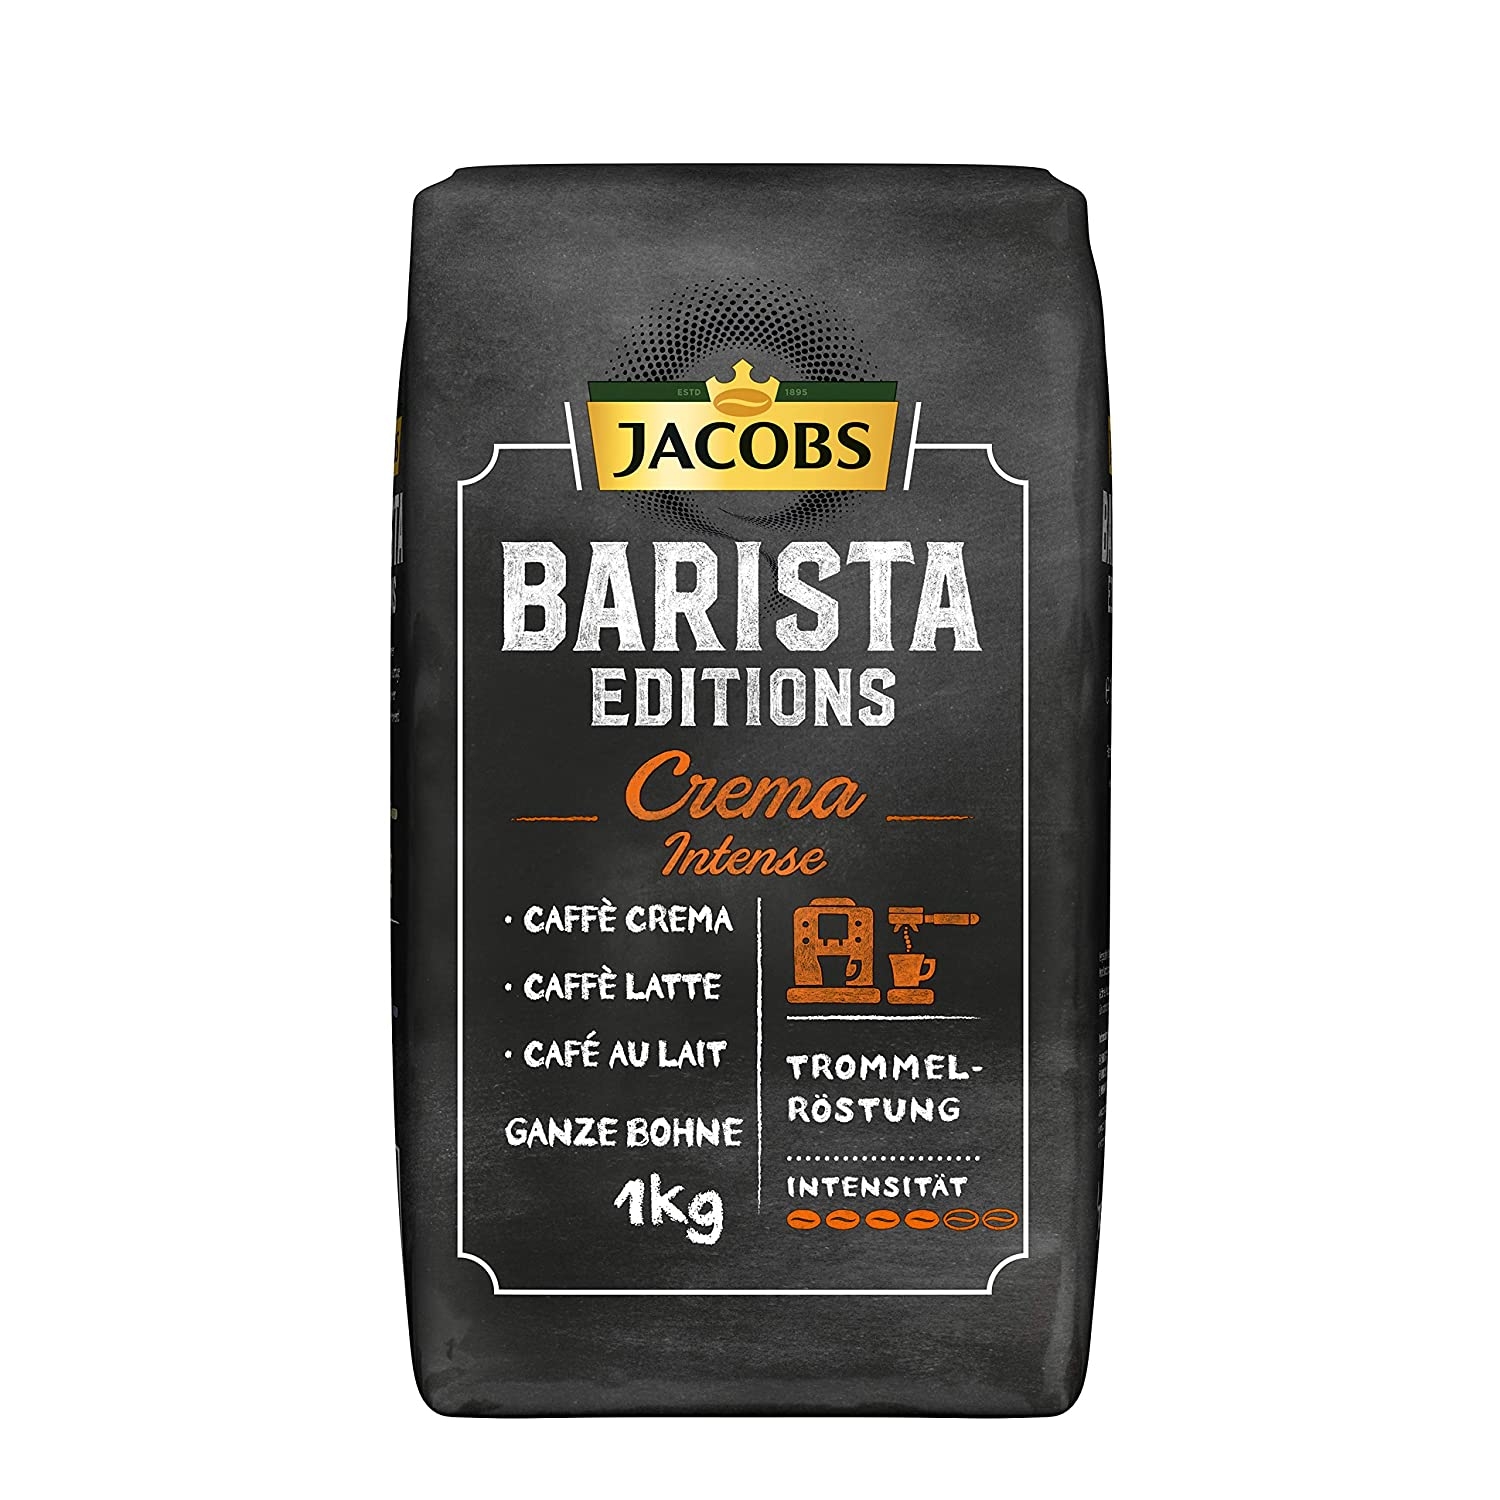 Jacobs Barista Editions Crema Intense 1kg boabe